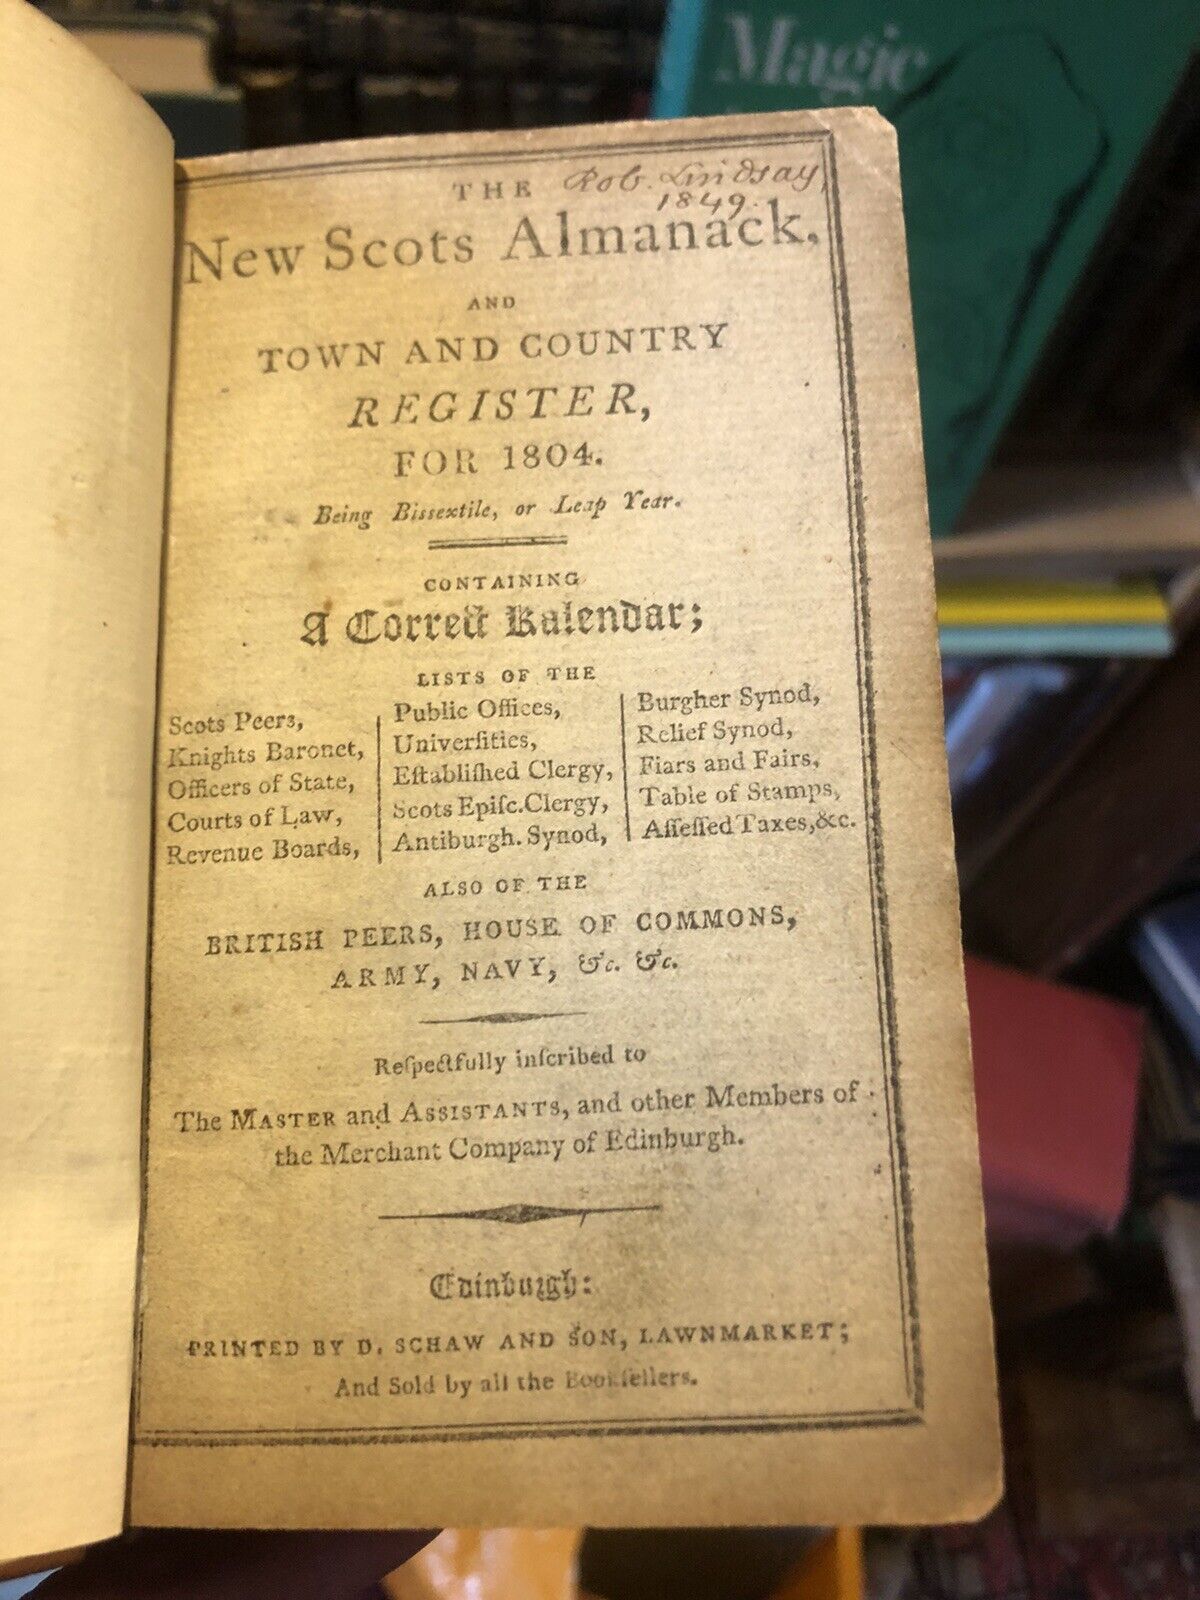 1804 New Scots Almanack and Town and County Register : Scottish History